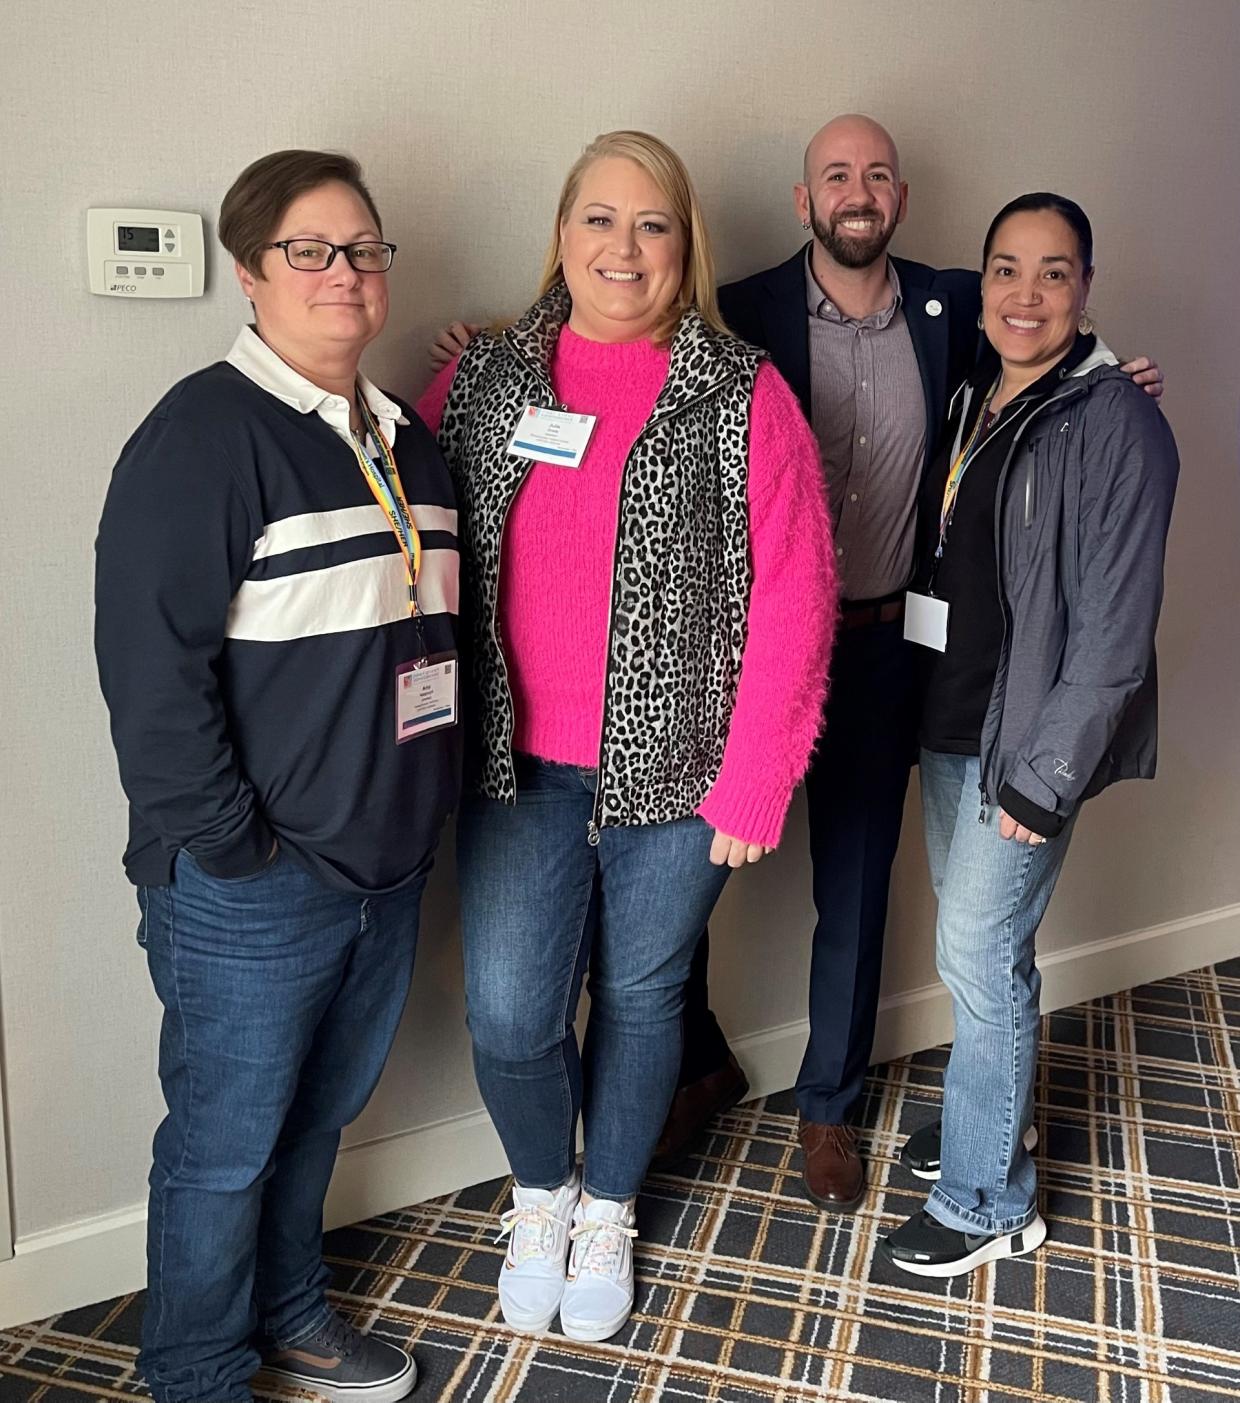 MPS conference participants after attending a session on ‘Trans Rights: Local, State, and National Updates’ with speaker Mason Dunn, Director of Education and Research, MA LGBT Chamber of Commerce.